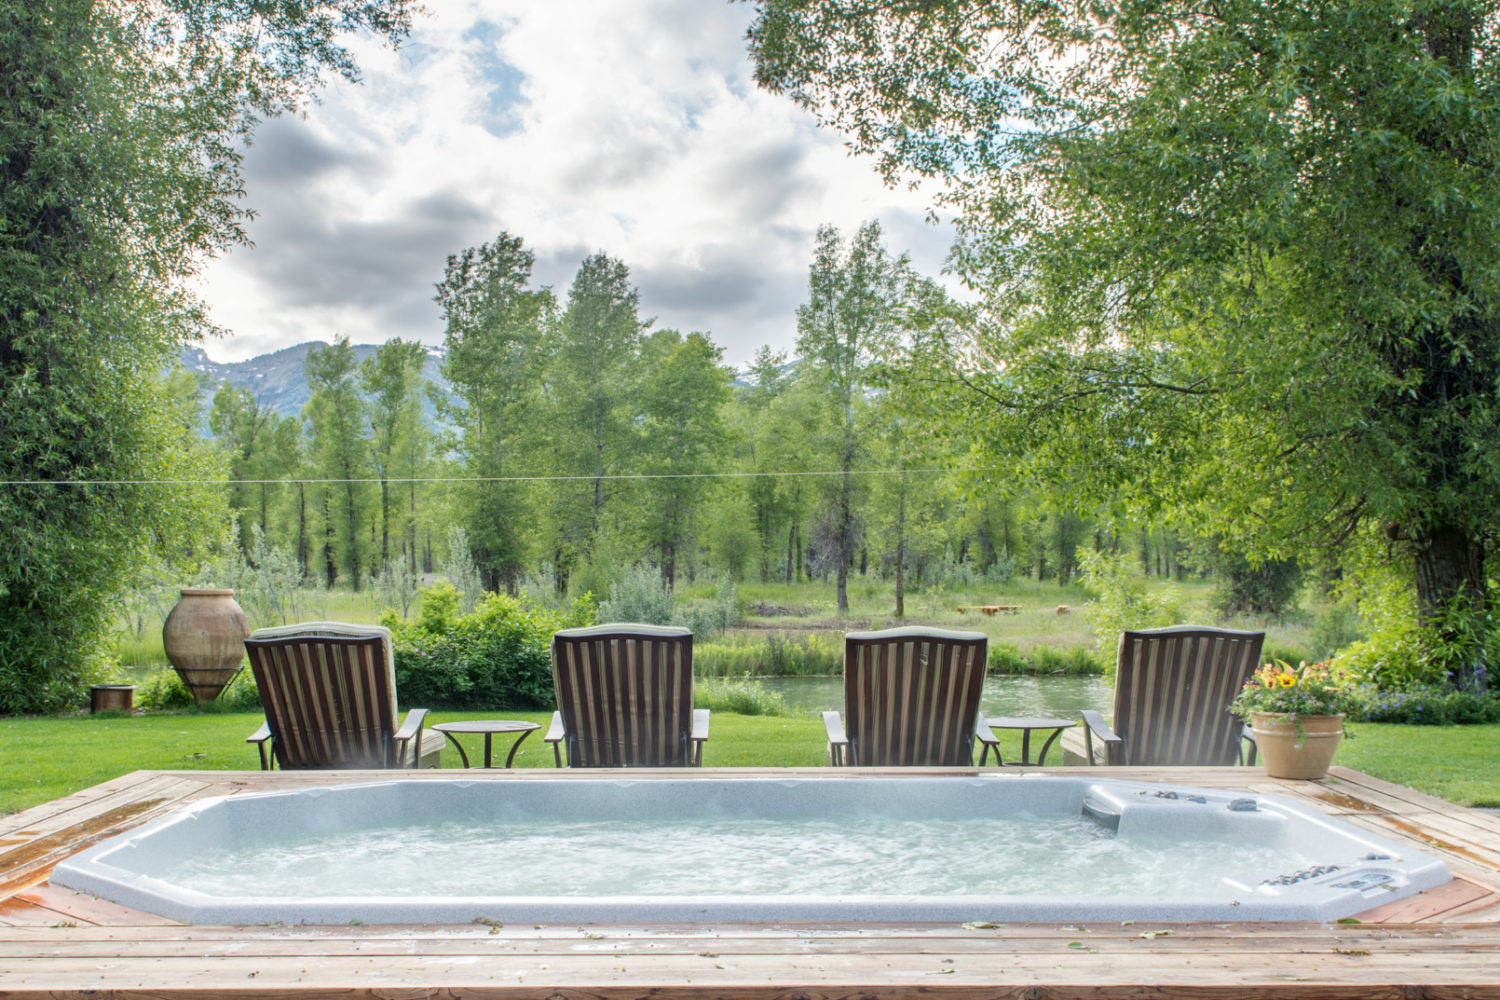 A large hot tub and 4 lawn chairs facing a creek, trees, and mountains